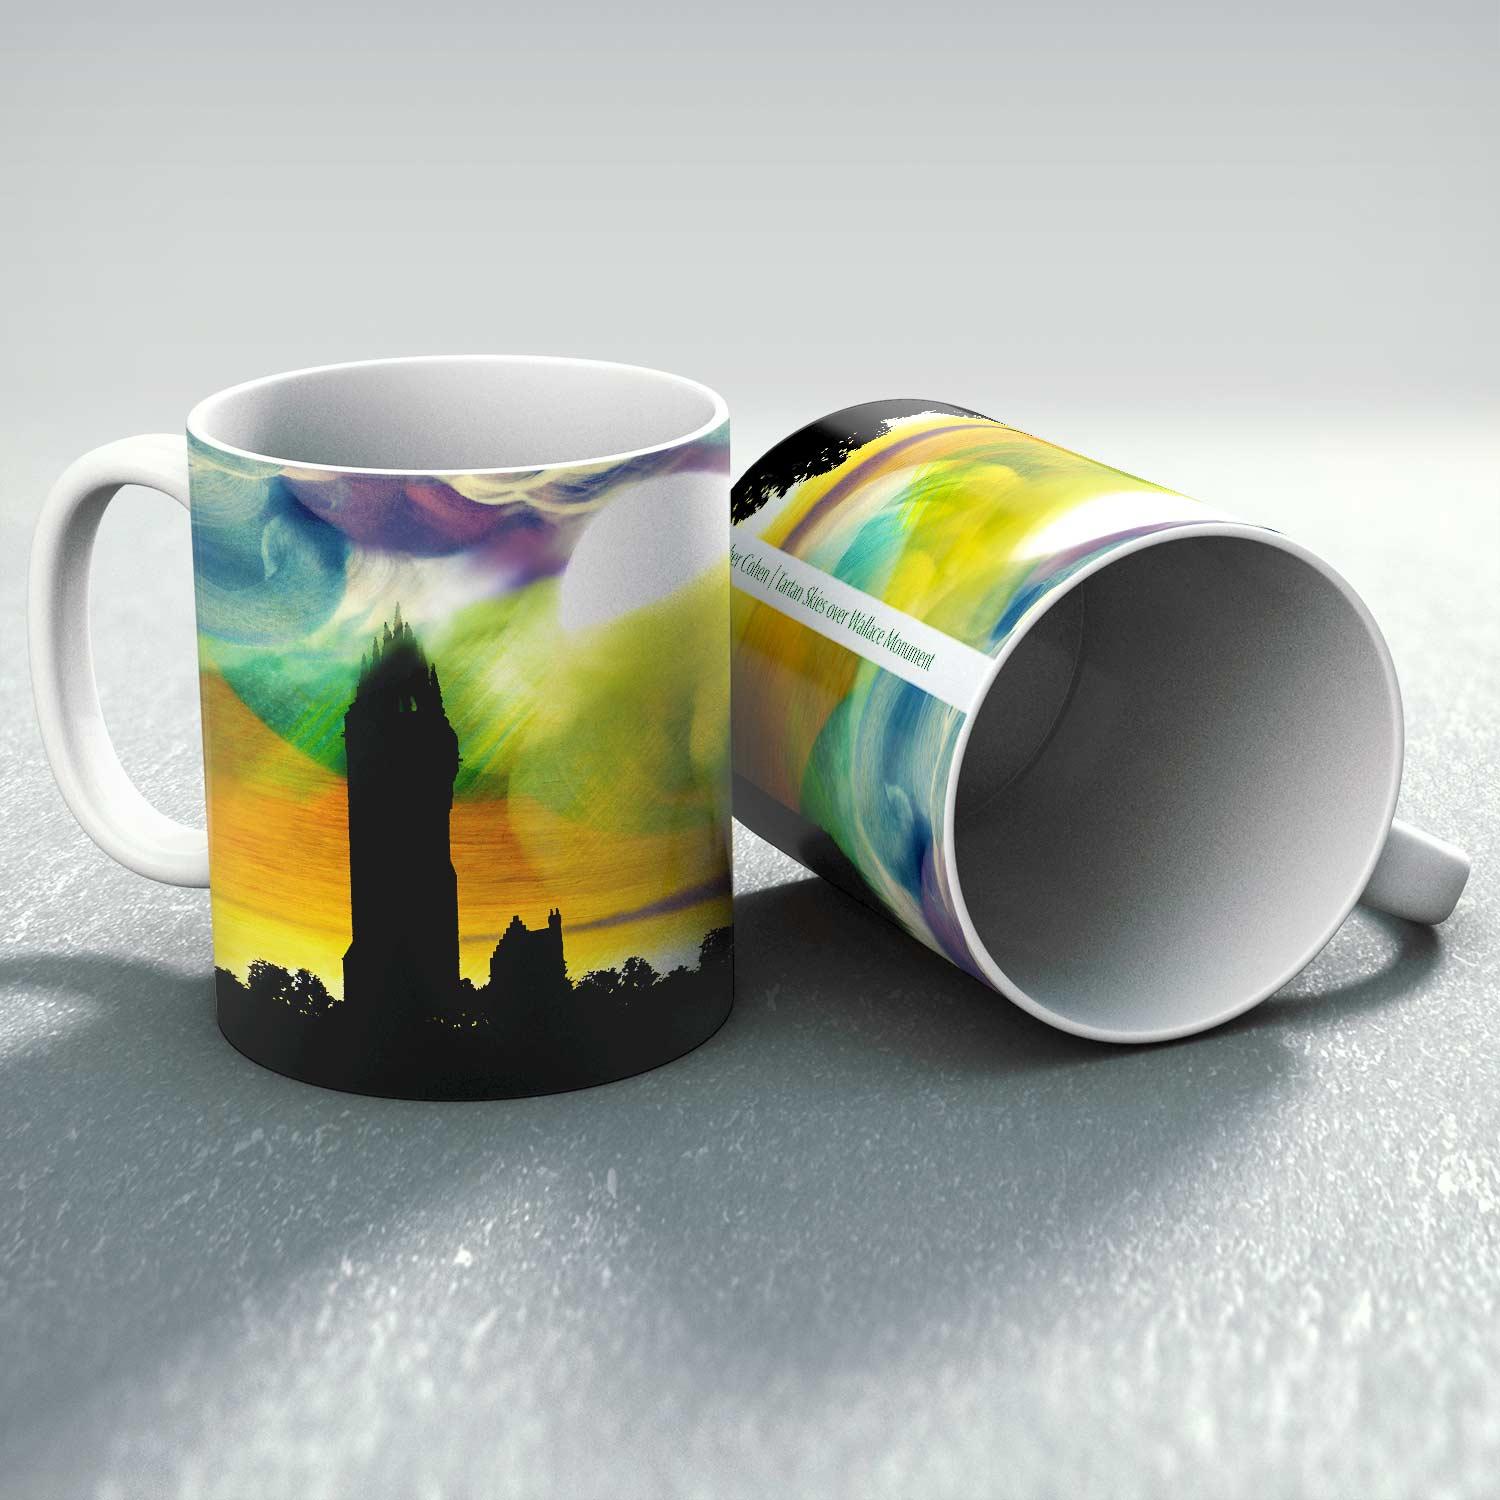 Tartan skies over Wallace monument Mug from an original painting by artist Esther Cohen